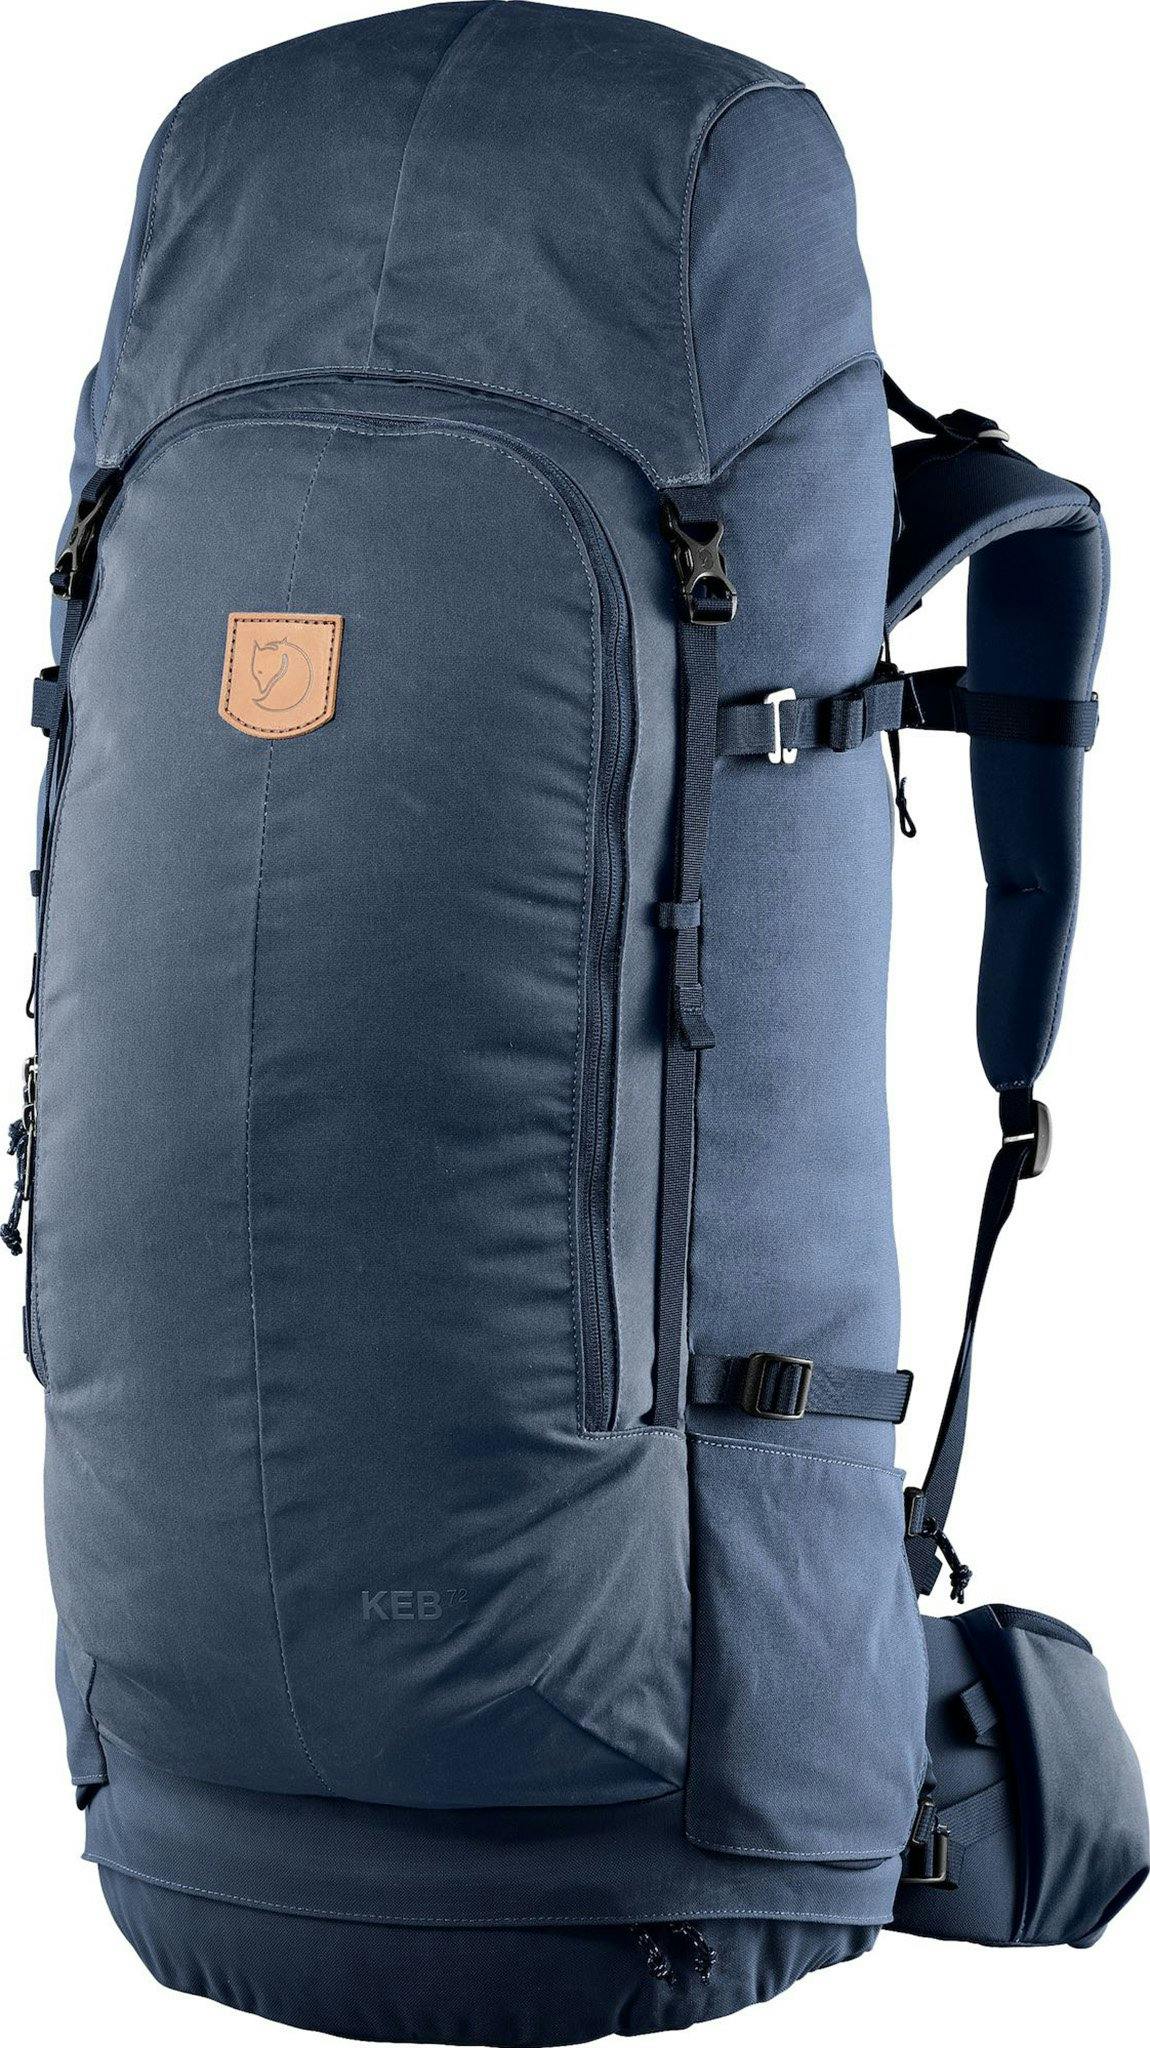 Product image for Keb Backpack 72L